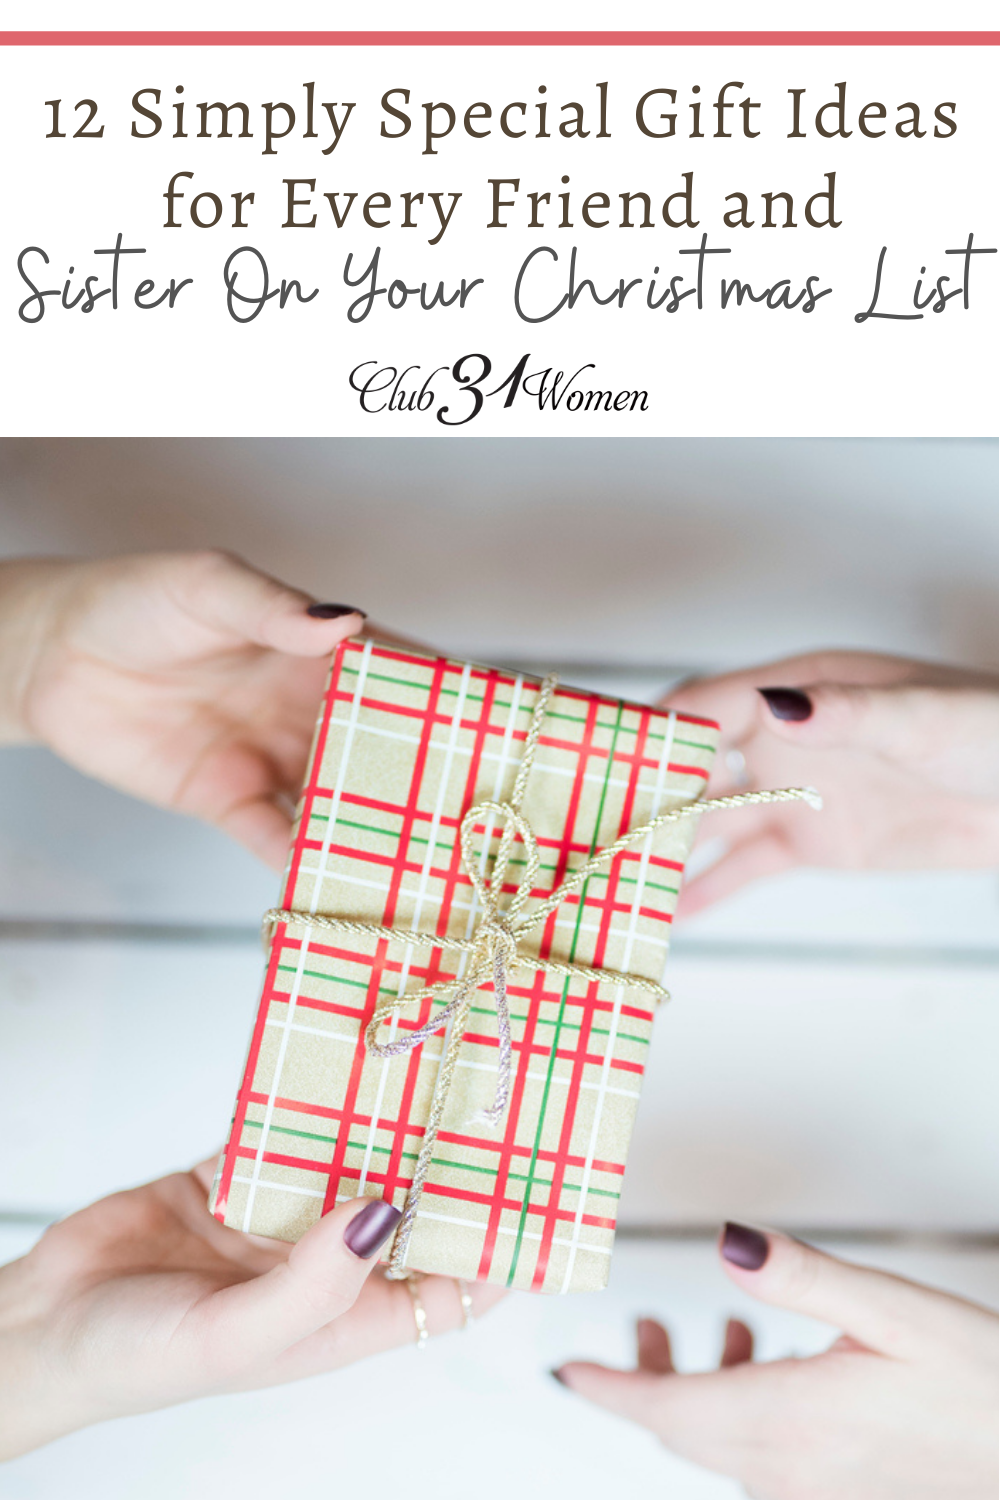 If you're looking for that perfect gift for your sister or friend, here is a lovely list of beautiful ideas to choose a gift she is sure to treasure! via @Club31Women